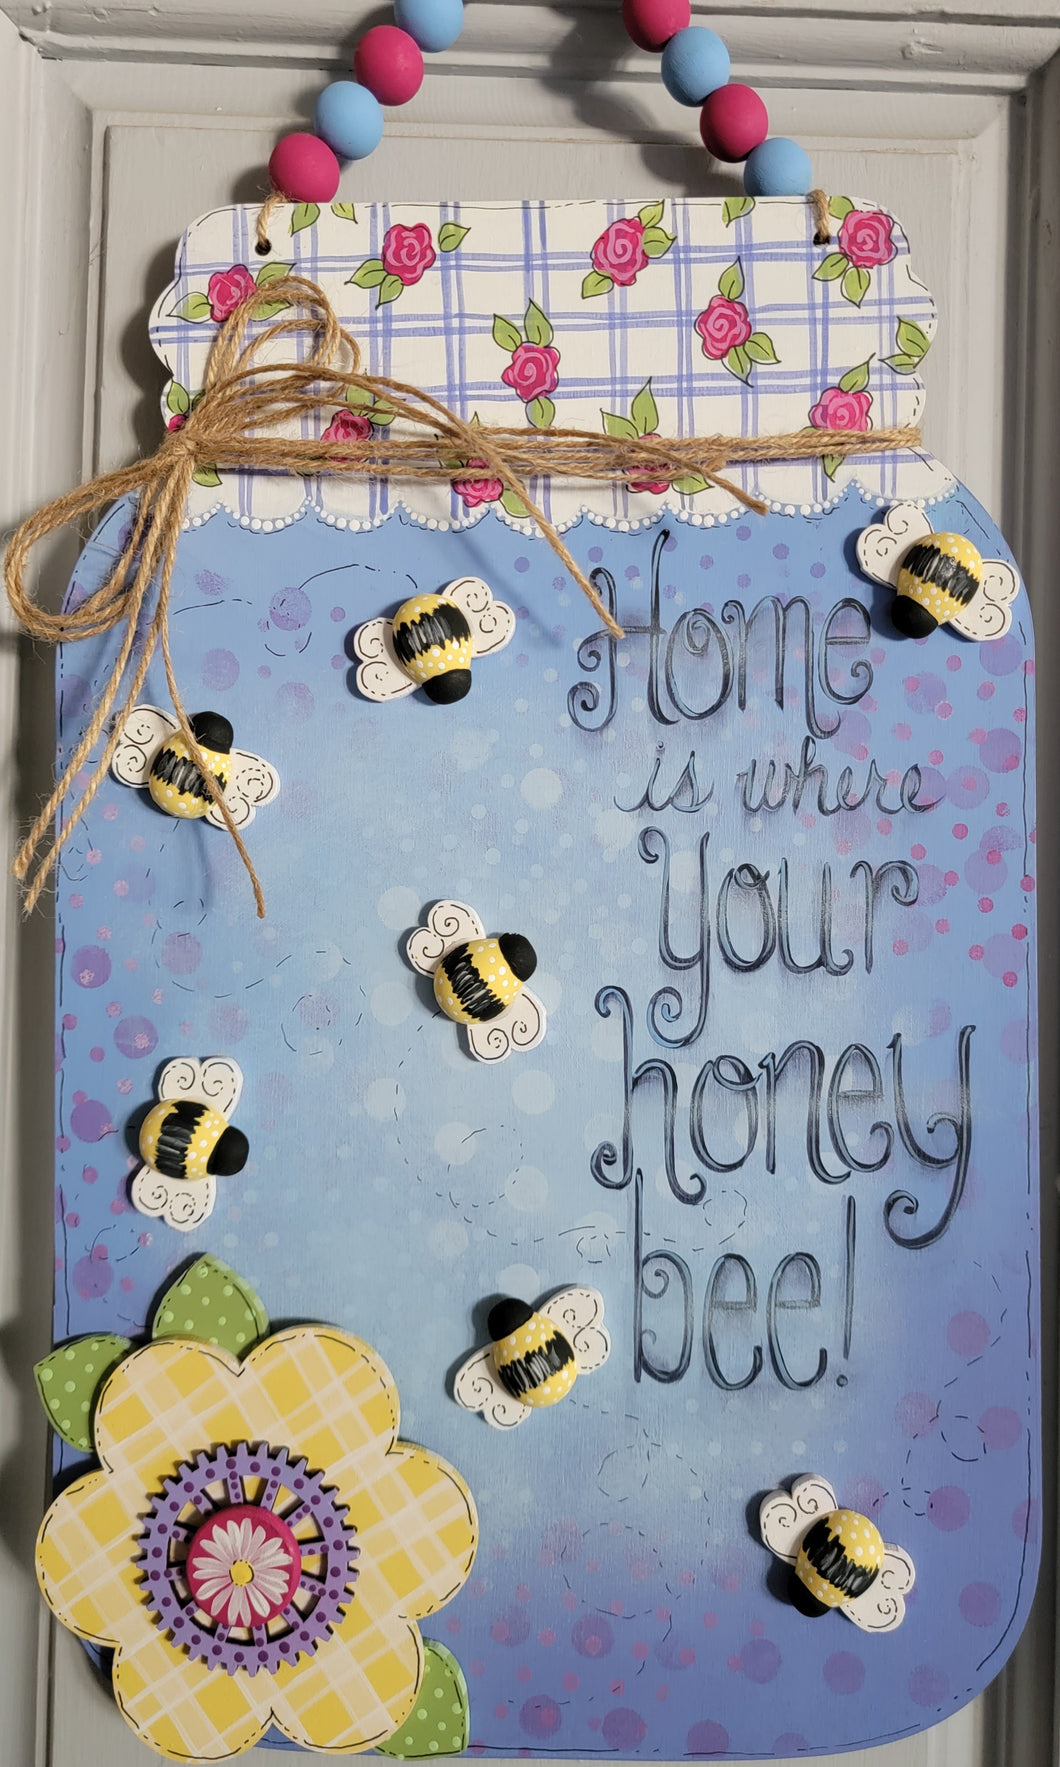 Home is Where Your Honey Bee!